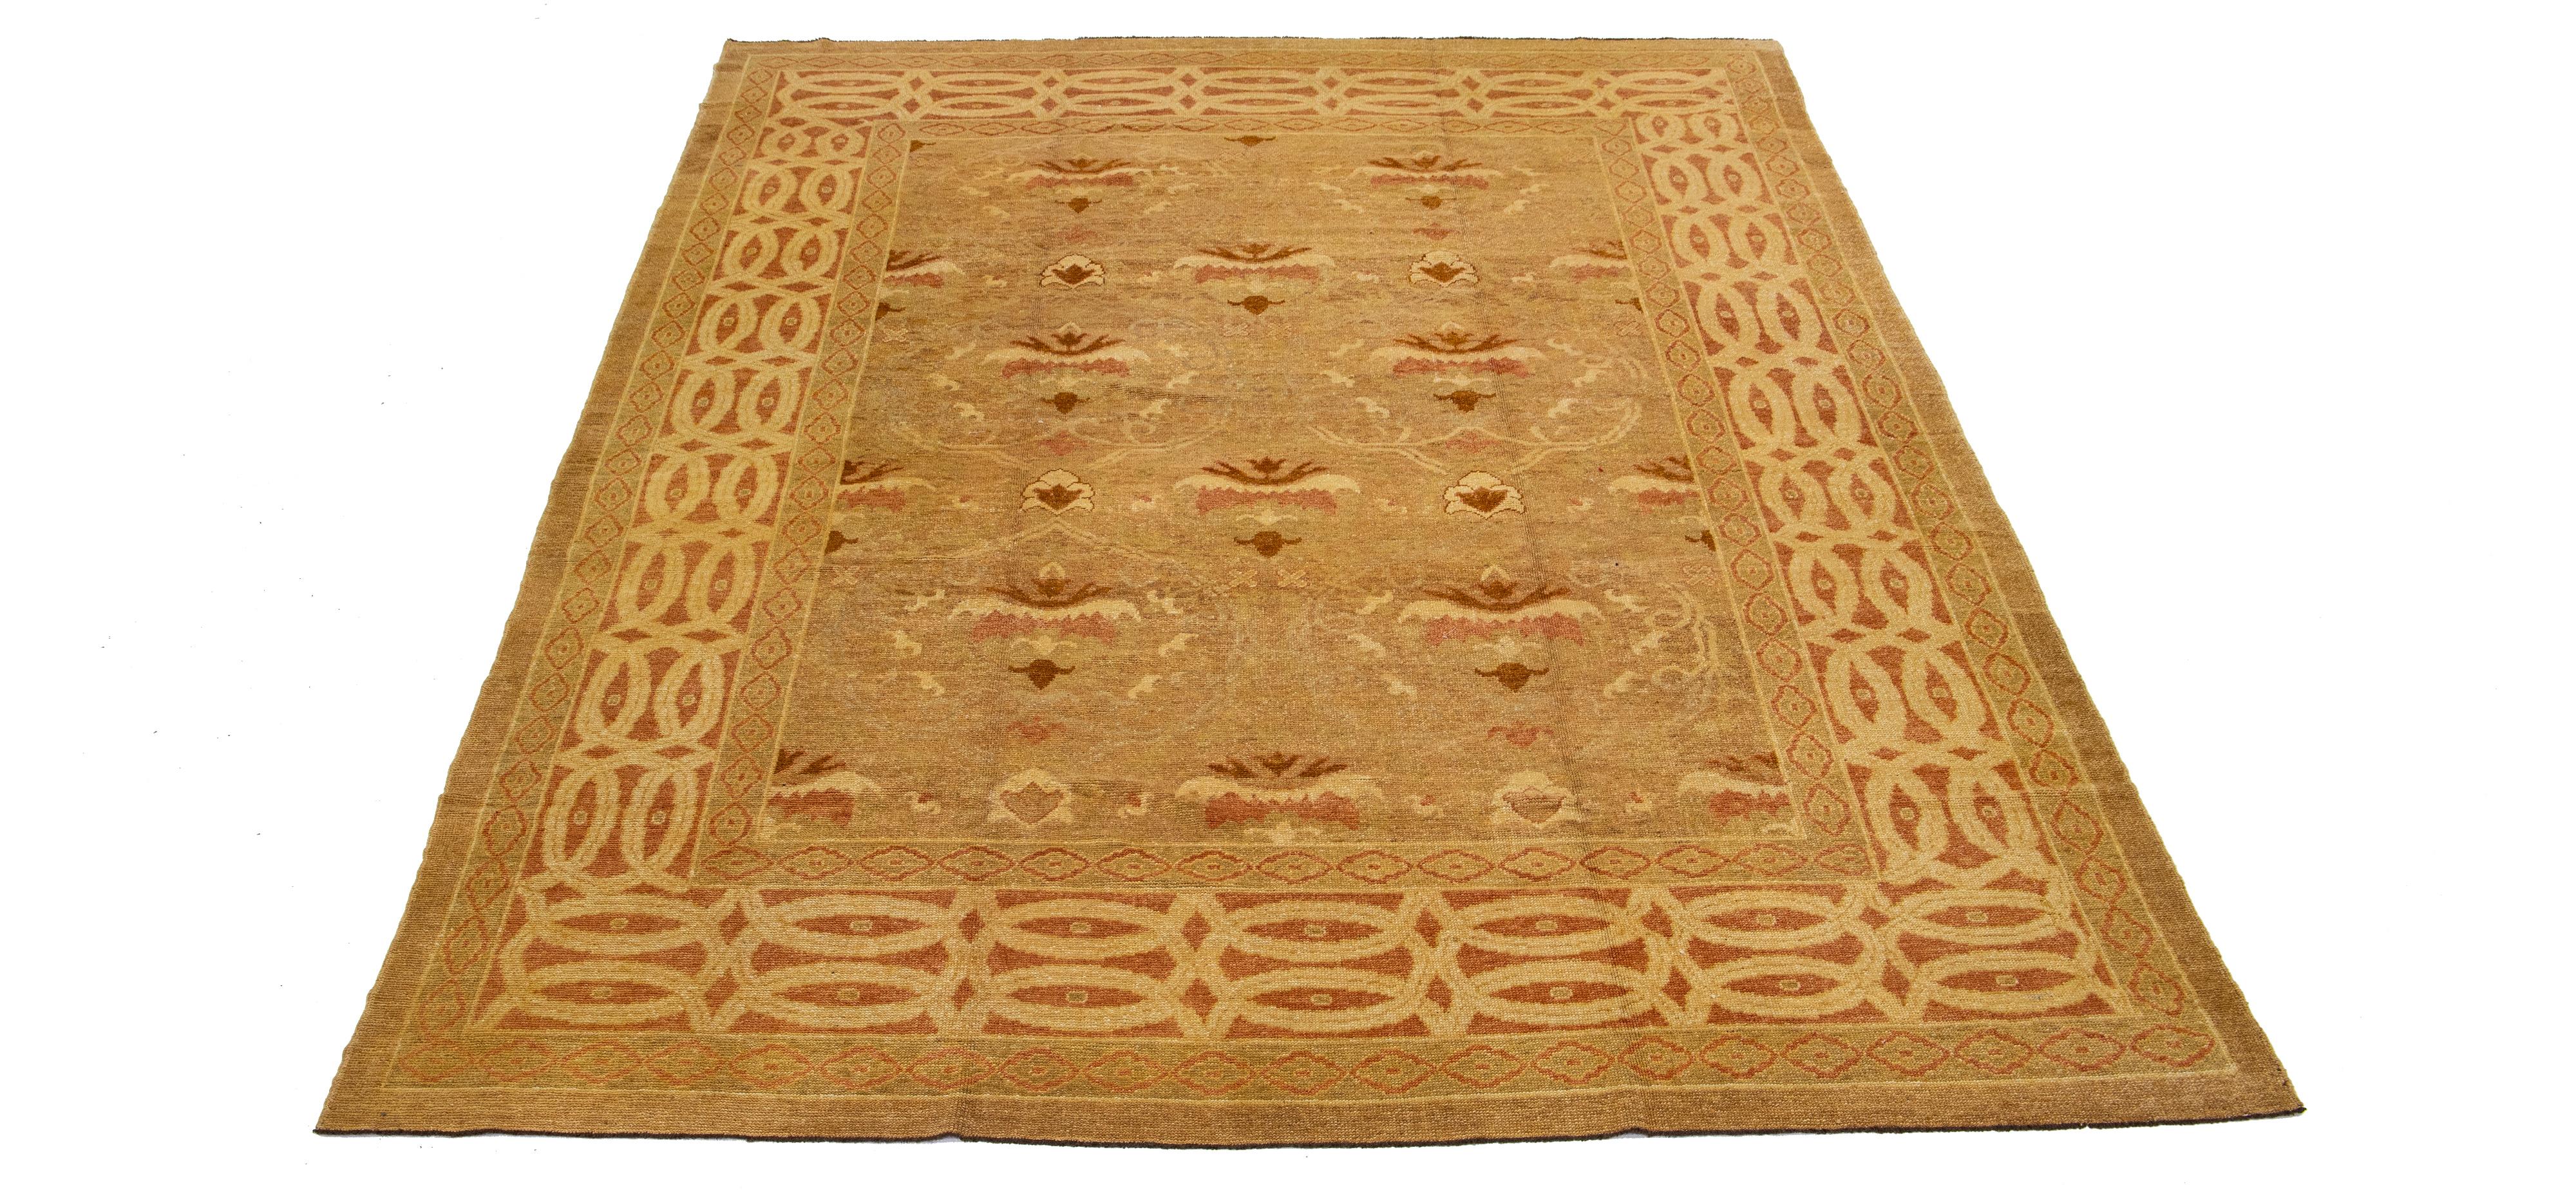 This antique Style Turkish wool rug features a charming tan color base and is hand-knotted with utmost attention to detail. With stunning peach and brown accents, it displays a captivating floral pattern that is alluring to any design.

This rug